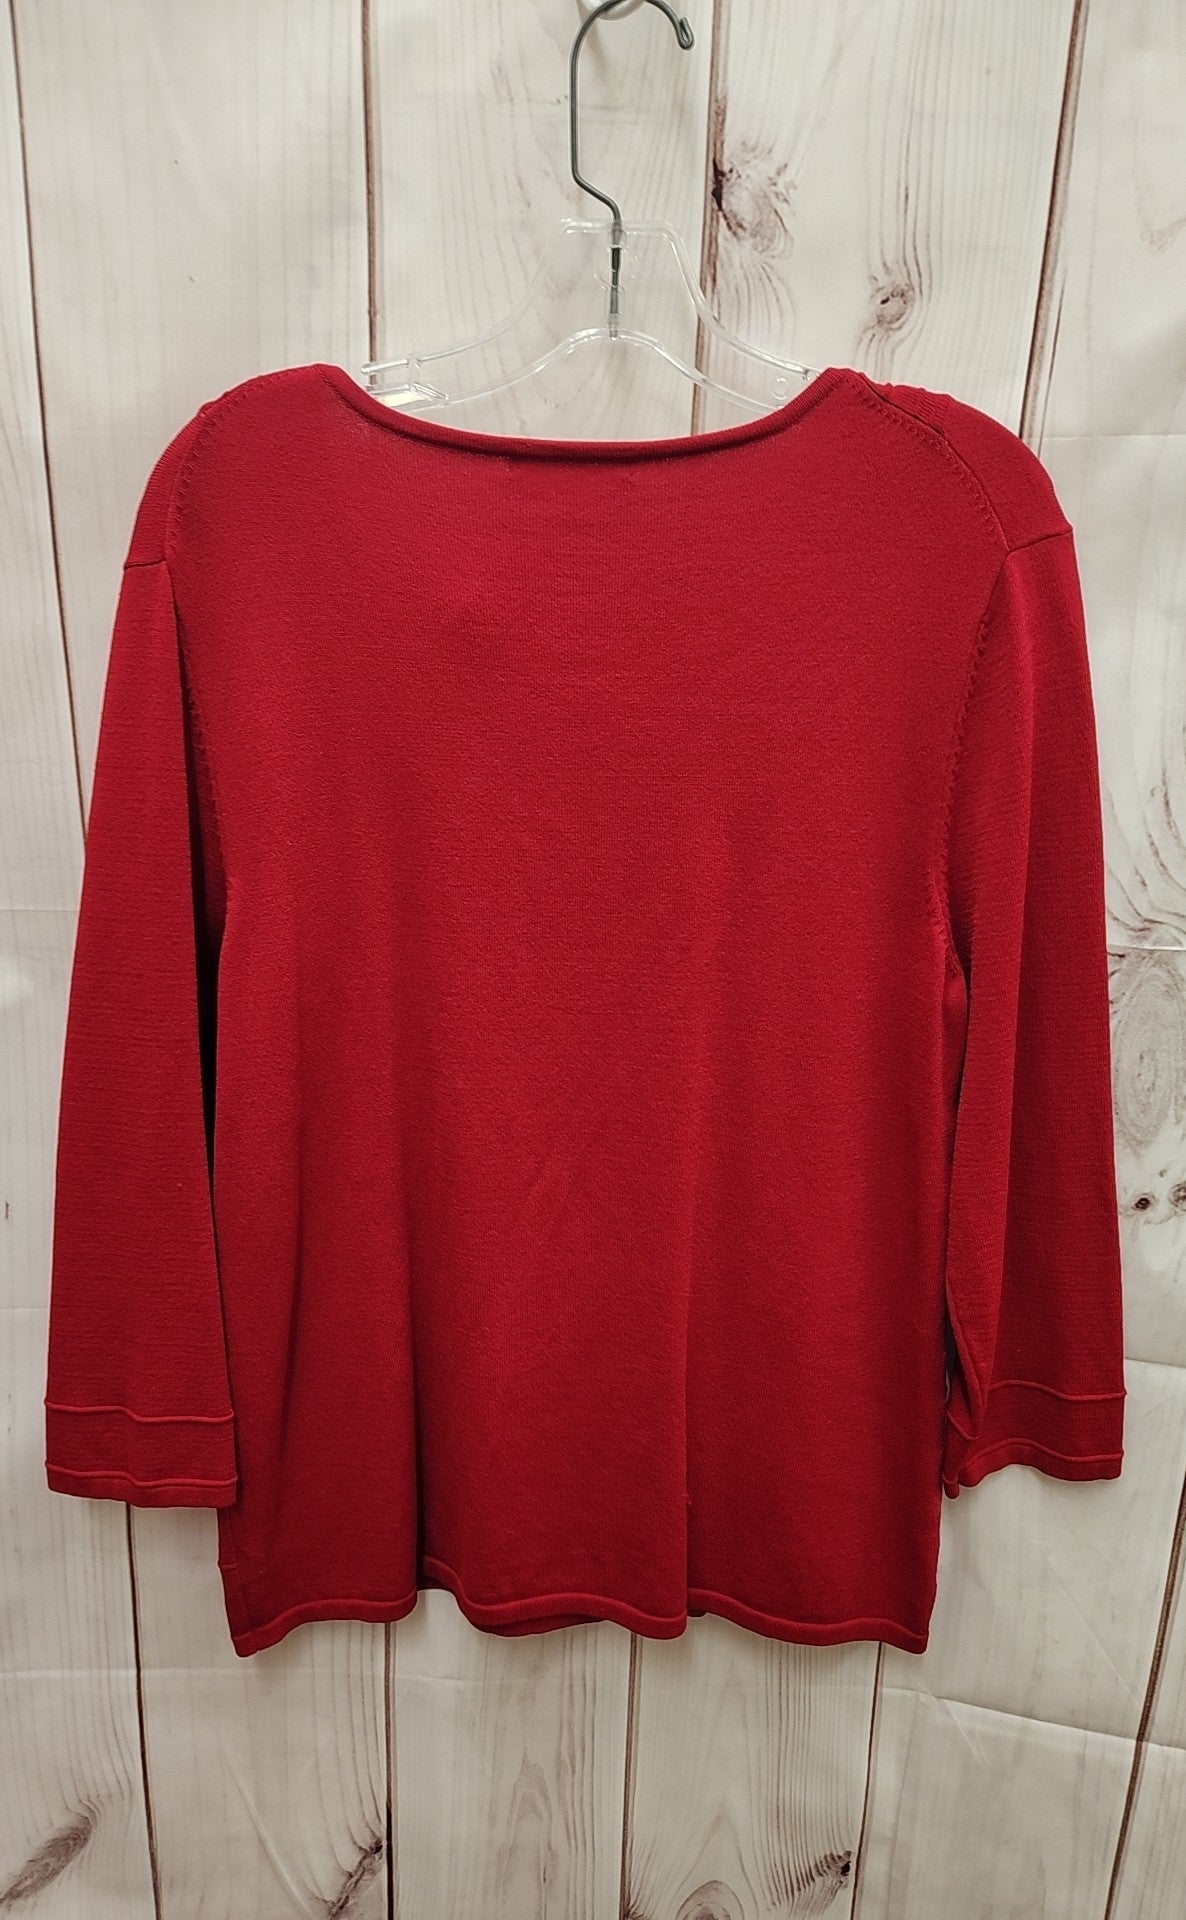 Cable & Gauge Women's Size XL Red Sweater